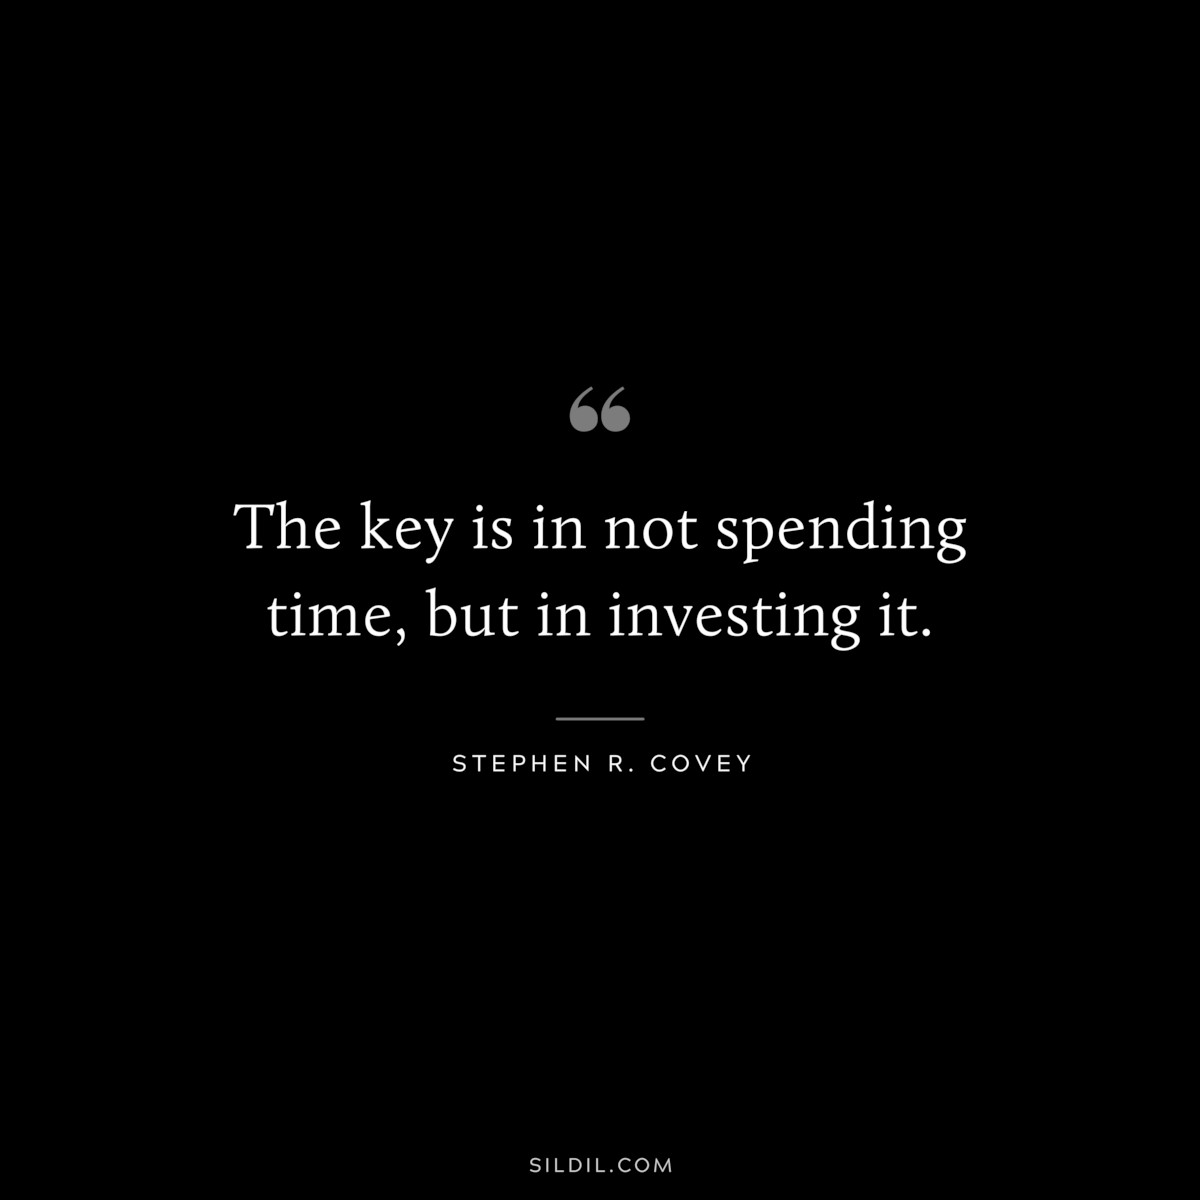 The key is in not spending time, but in investing it. ― Stephen R. Covey